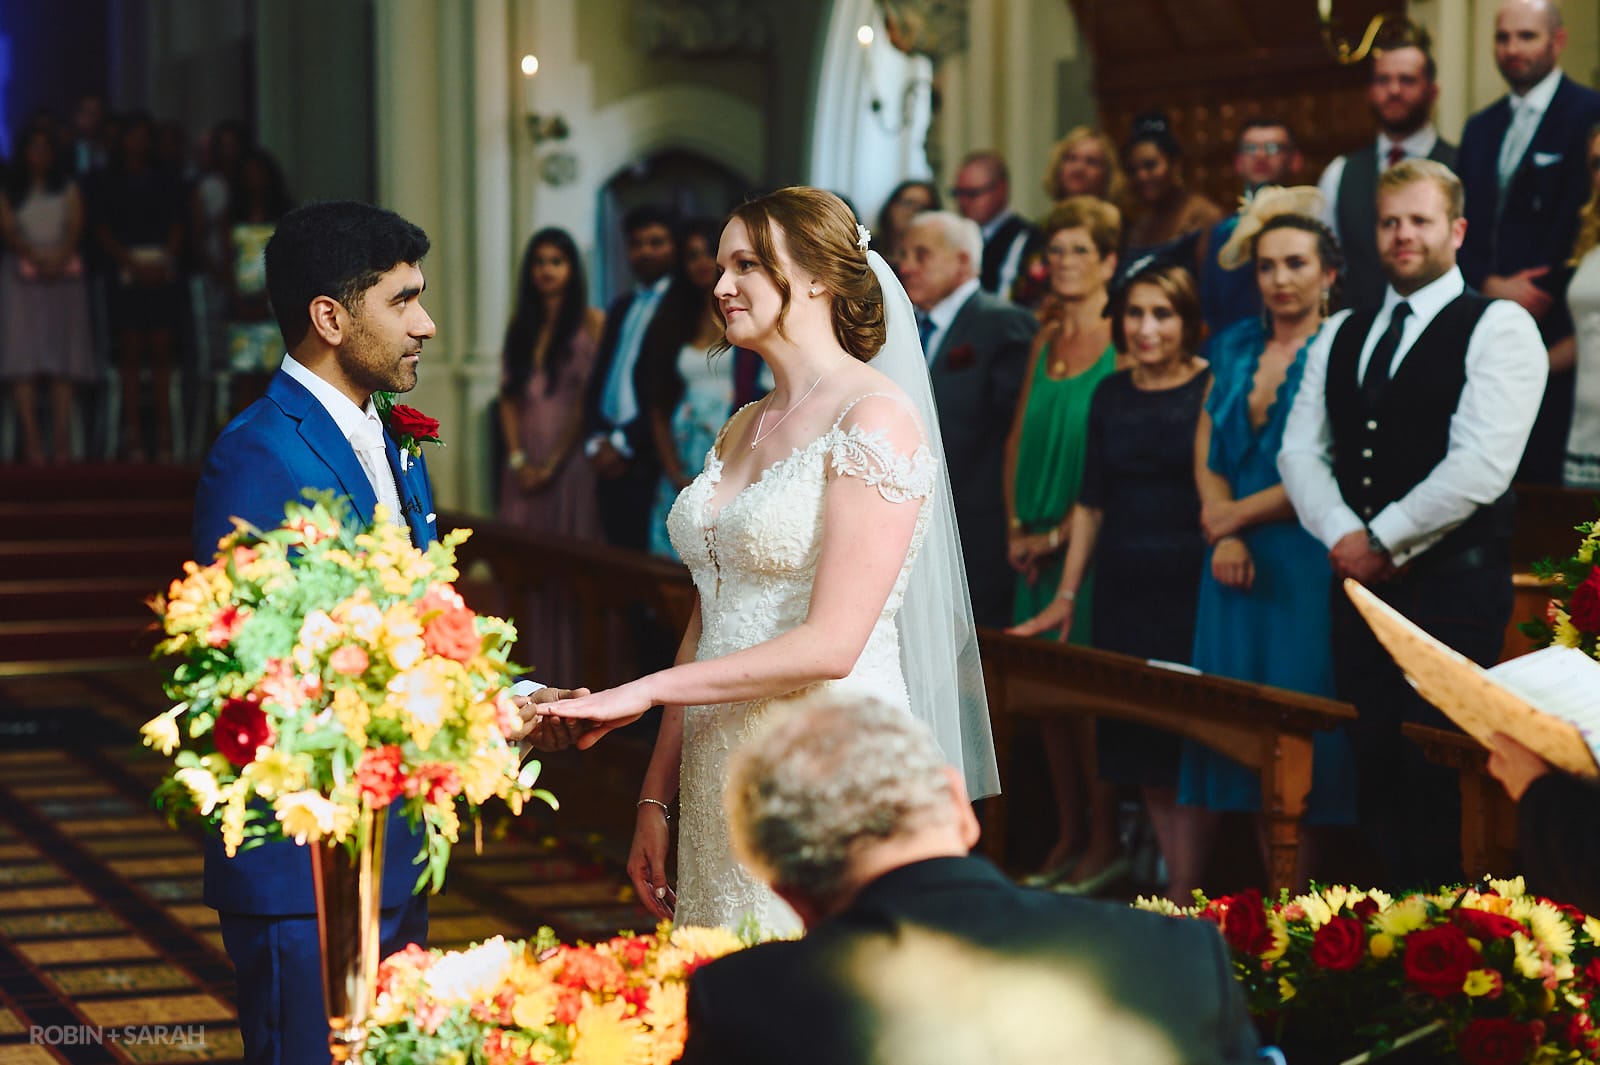 Bride and groom exchange wedding rings during ceremony as guests watch